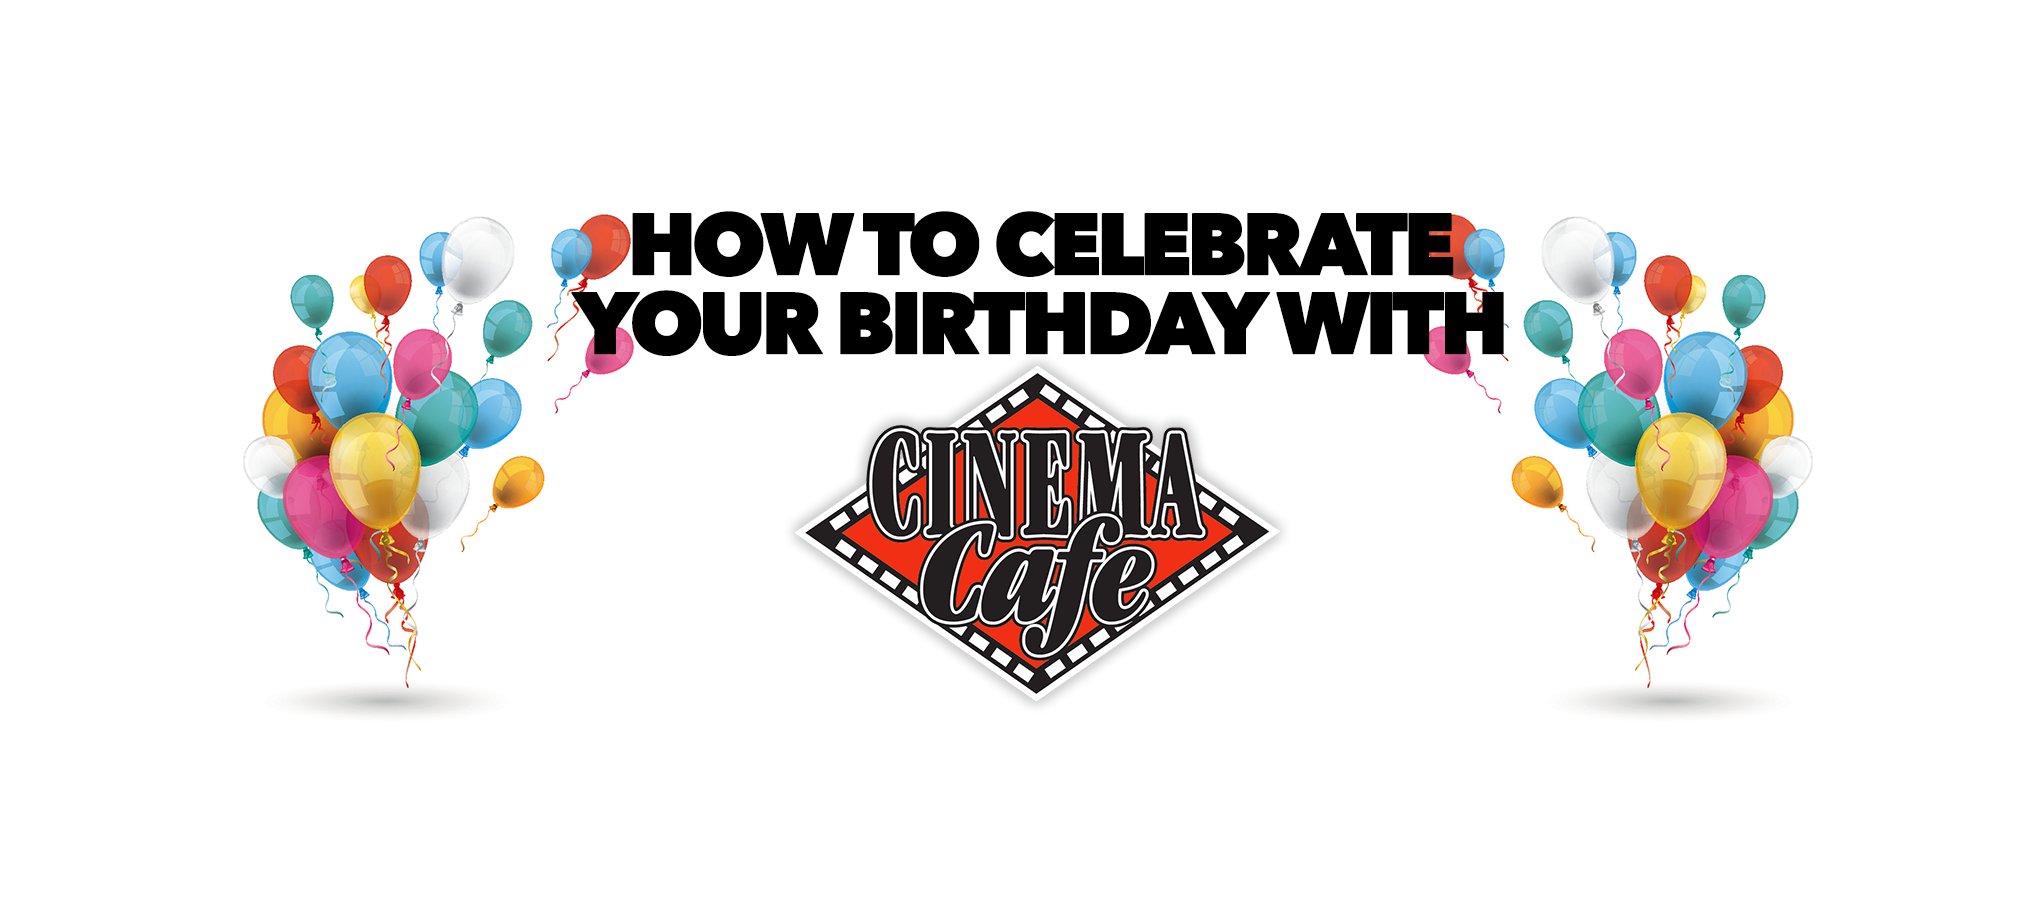 How to Celebrate Your Birthday with Cinema Cafe